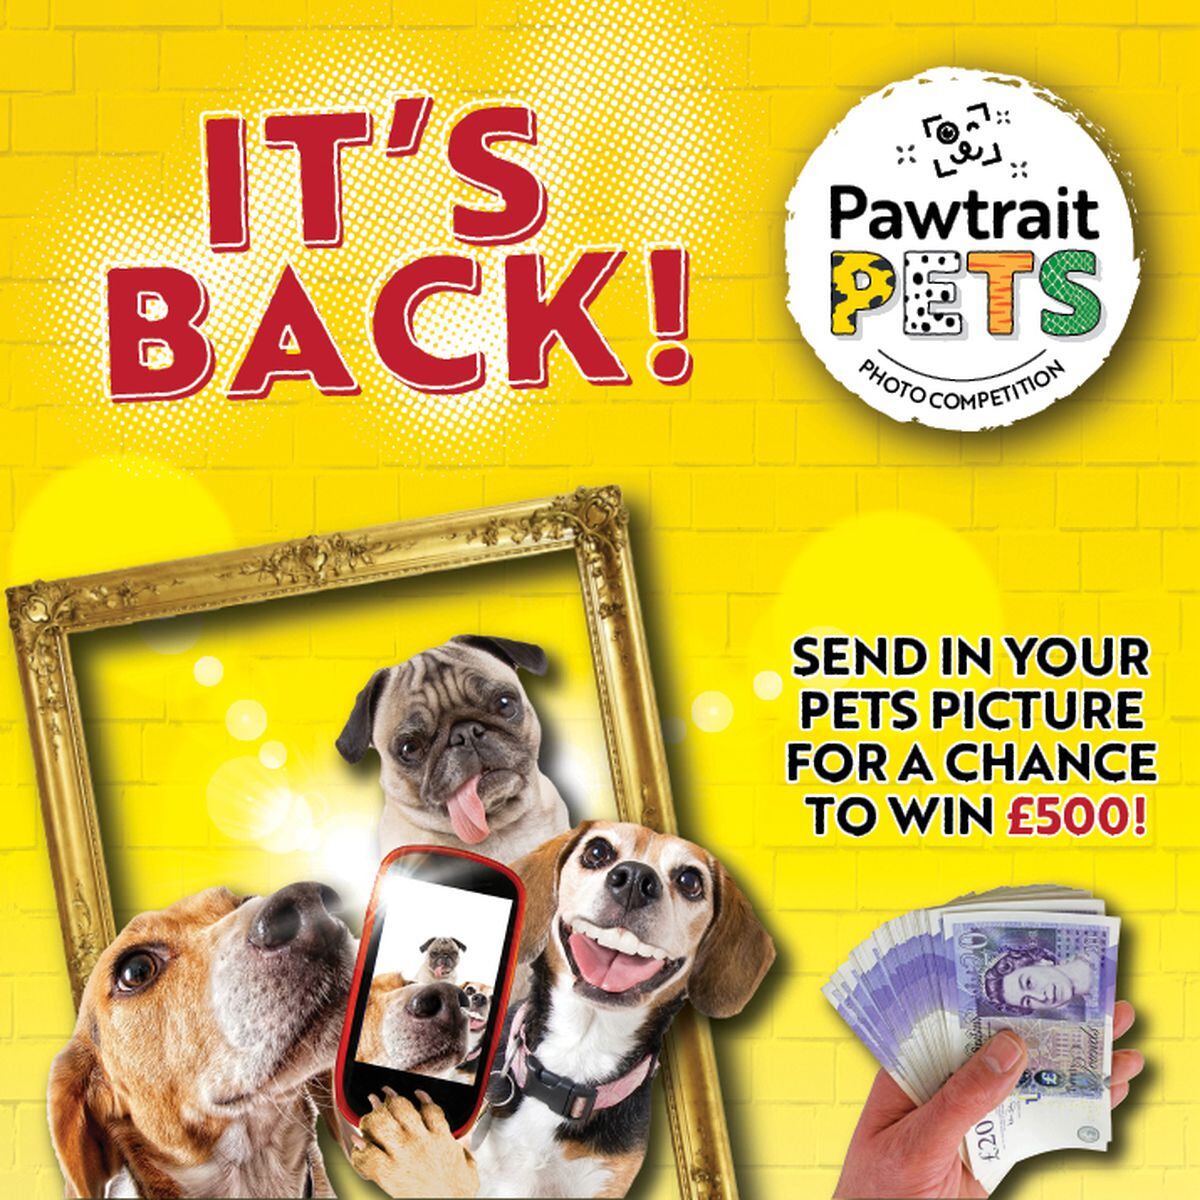 Scroll down to find out more about our Pawtrait Pets competition